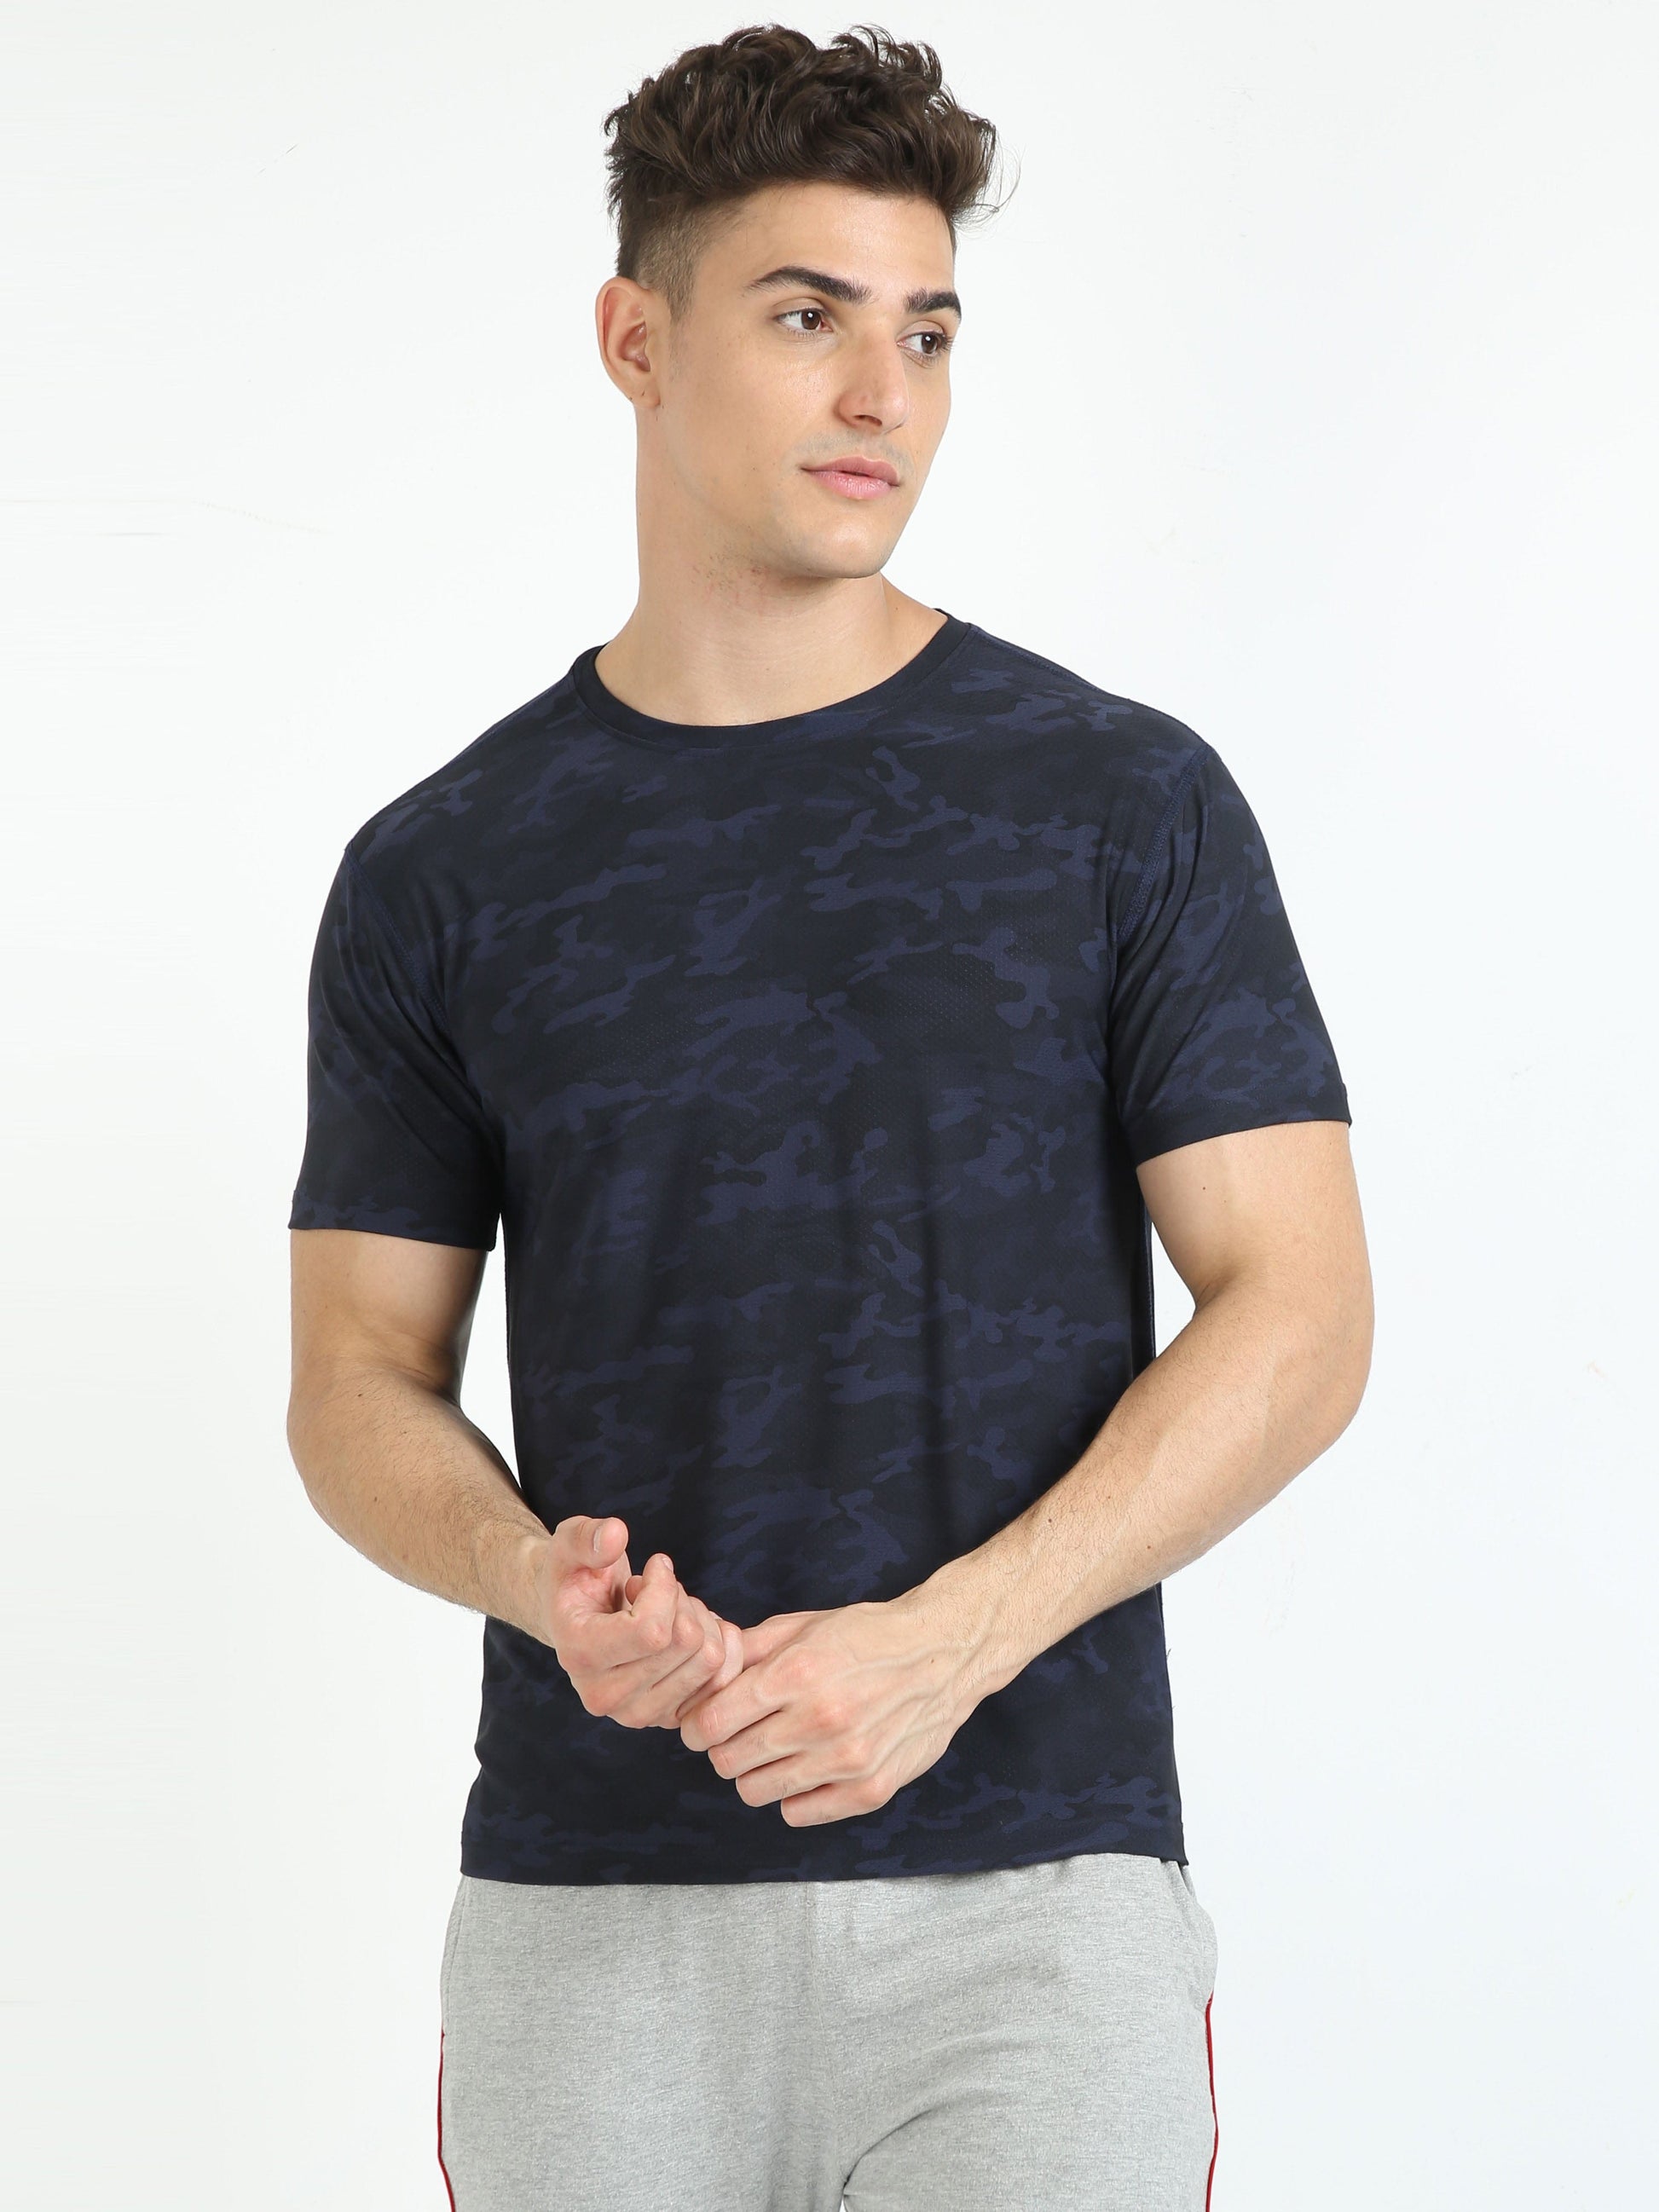 Pickled Bluewood Sports Tee